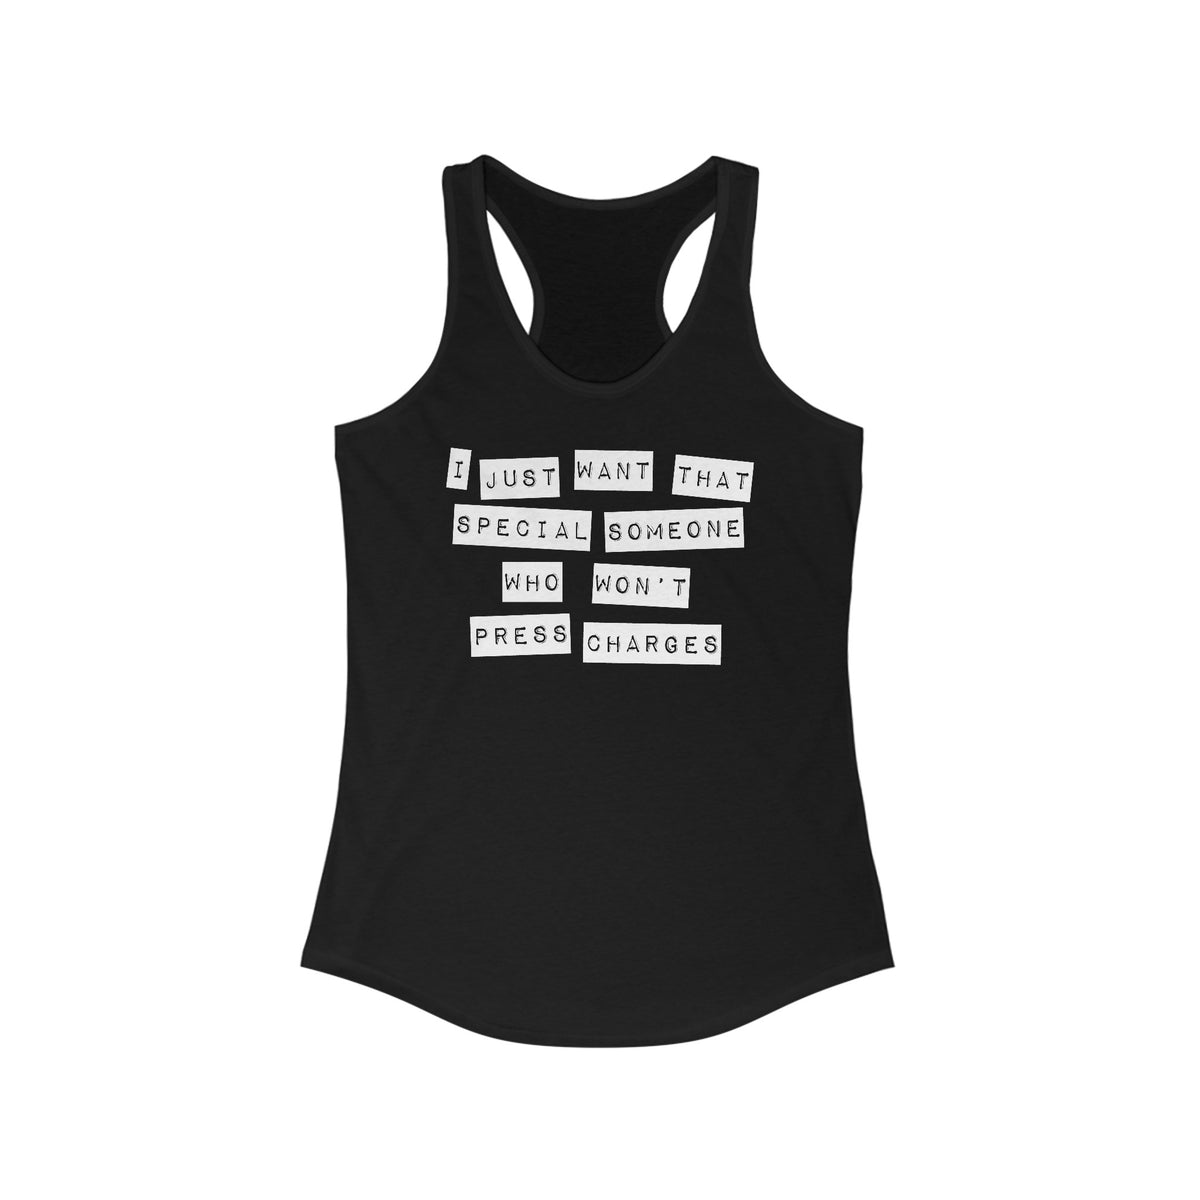 I Just Want That Special Someone Who Won't Press Charges - Women’s Racerback Tank